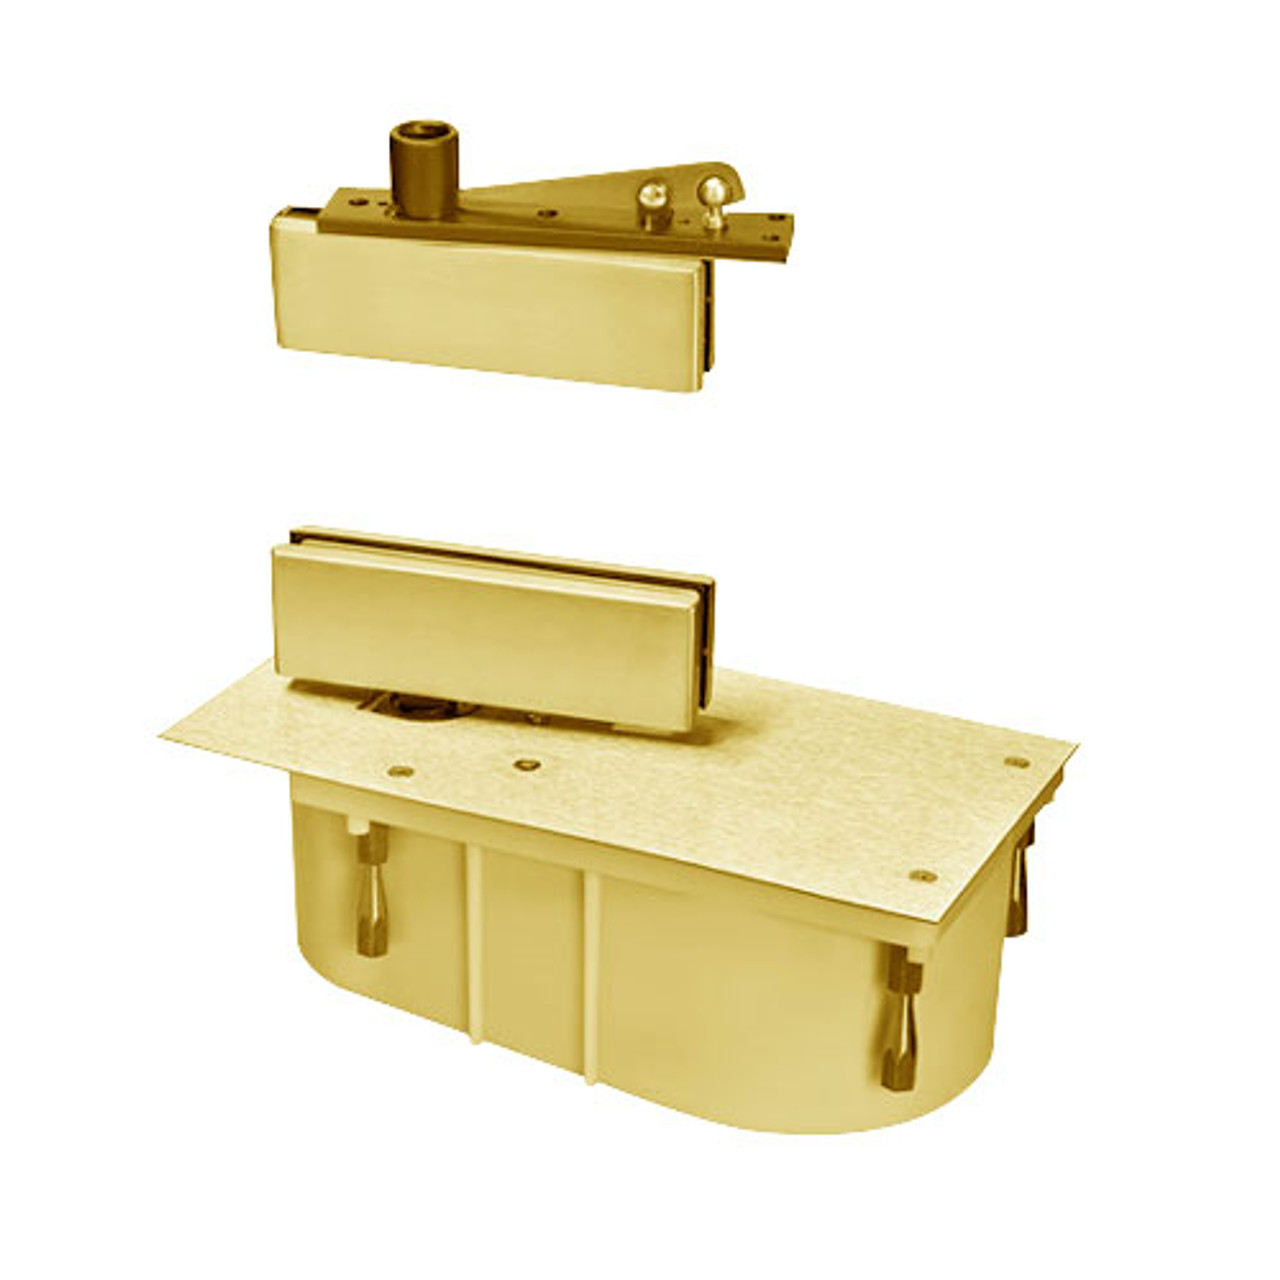 428-105S-LFP-CWF-RH-605 Rixson 428 Series Heavy Duty Single Acting Center Hung Floor Closer with Patch Fittings in Bright Brass Finish